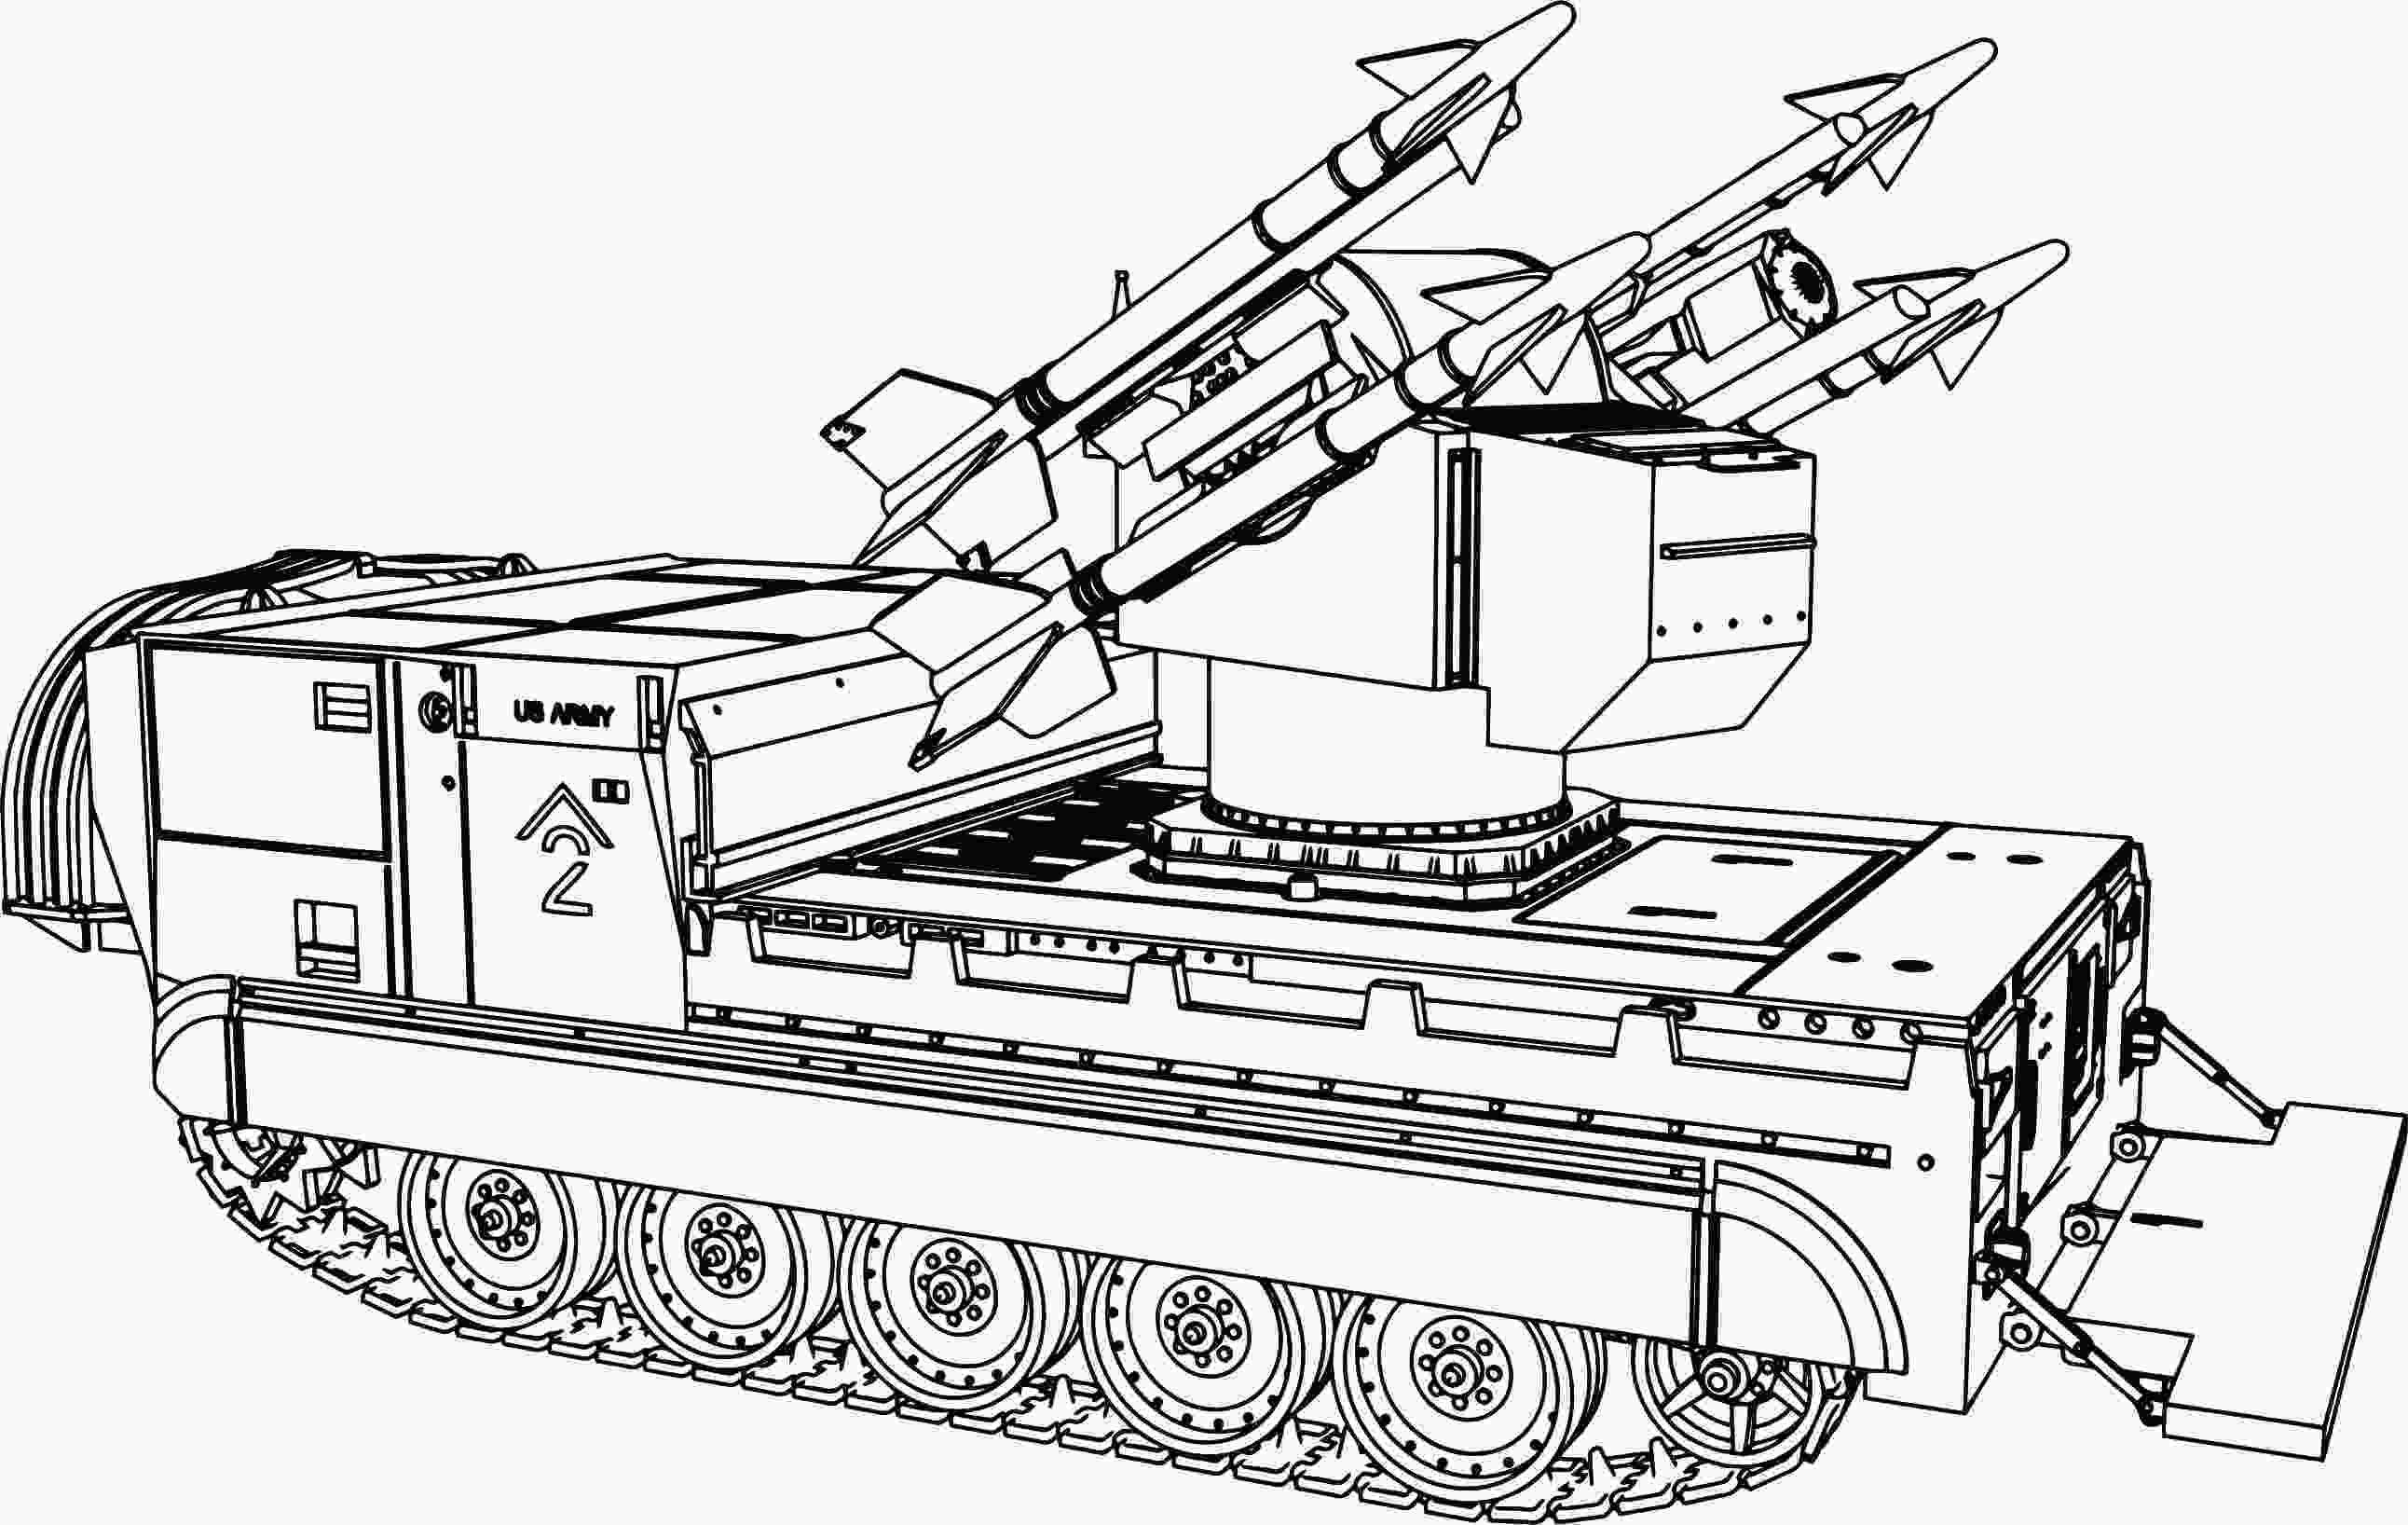 Printable Army Tank Coloring Pages Pdf - Army Tank Coloring Pages to Print